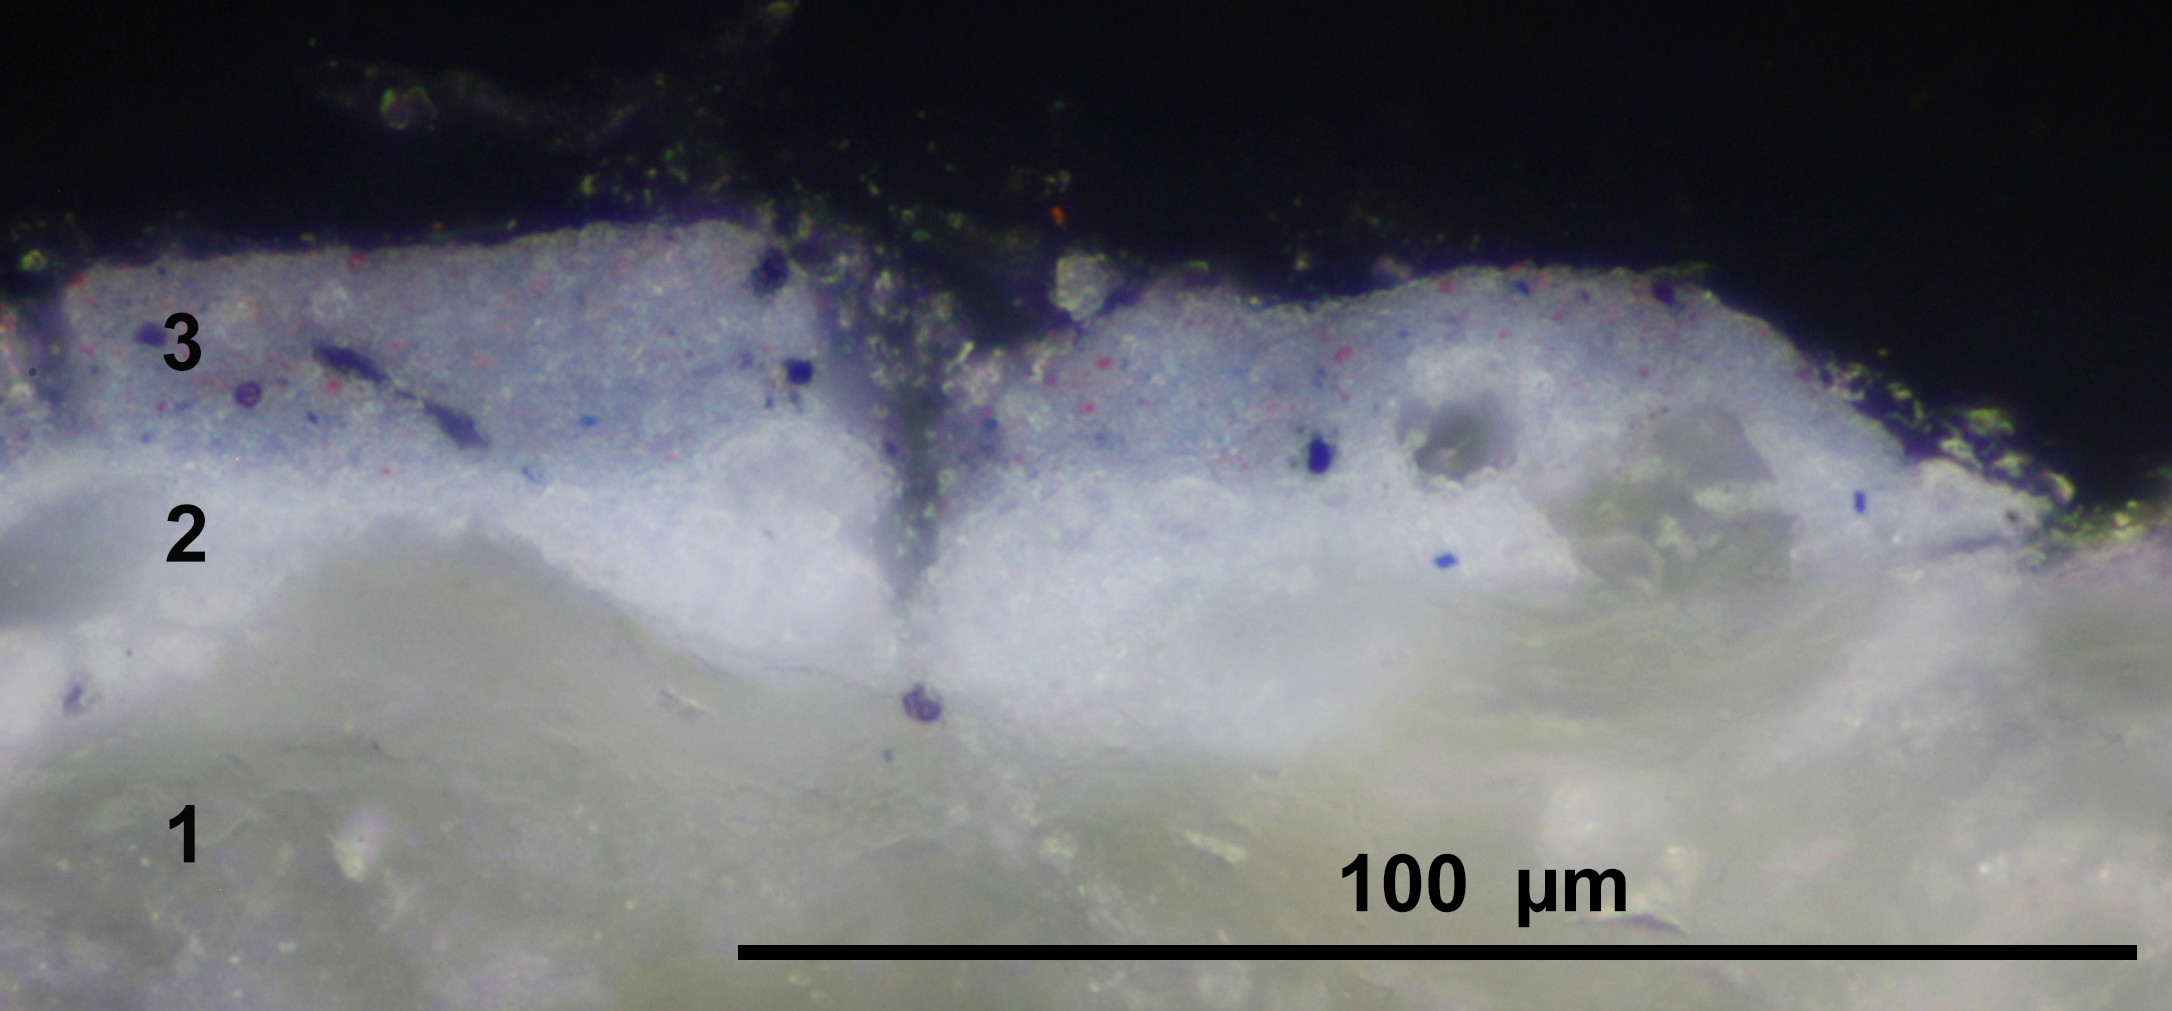 A magnified paint sample viewed in cross-section showing blue then purple paint layers above the fibres of a paper support